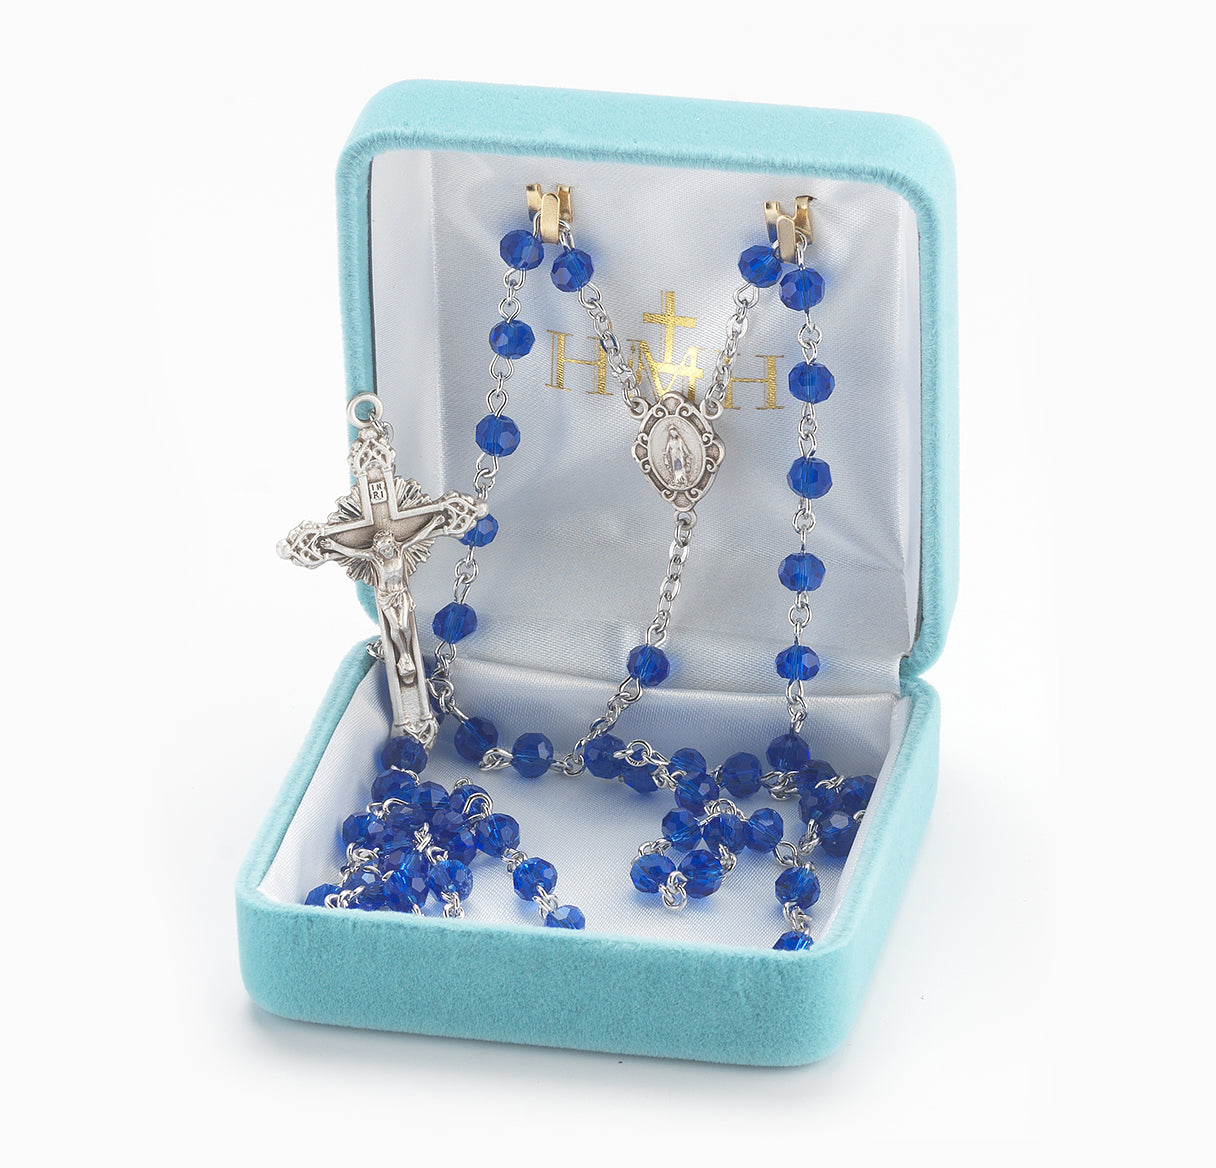 Rosary Sterling Crucifix and Centerpiece Created with Swarovski Crystal 5mm Round Caribbean Blue Beads by HMH